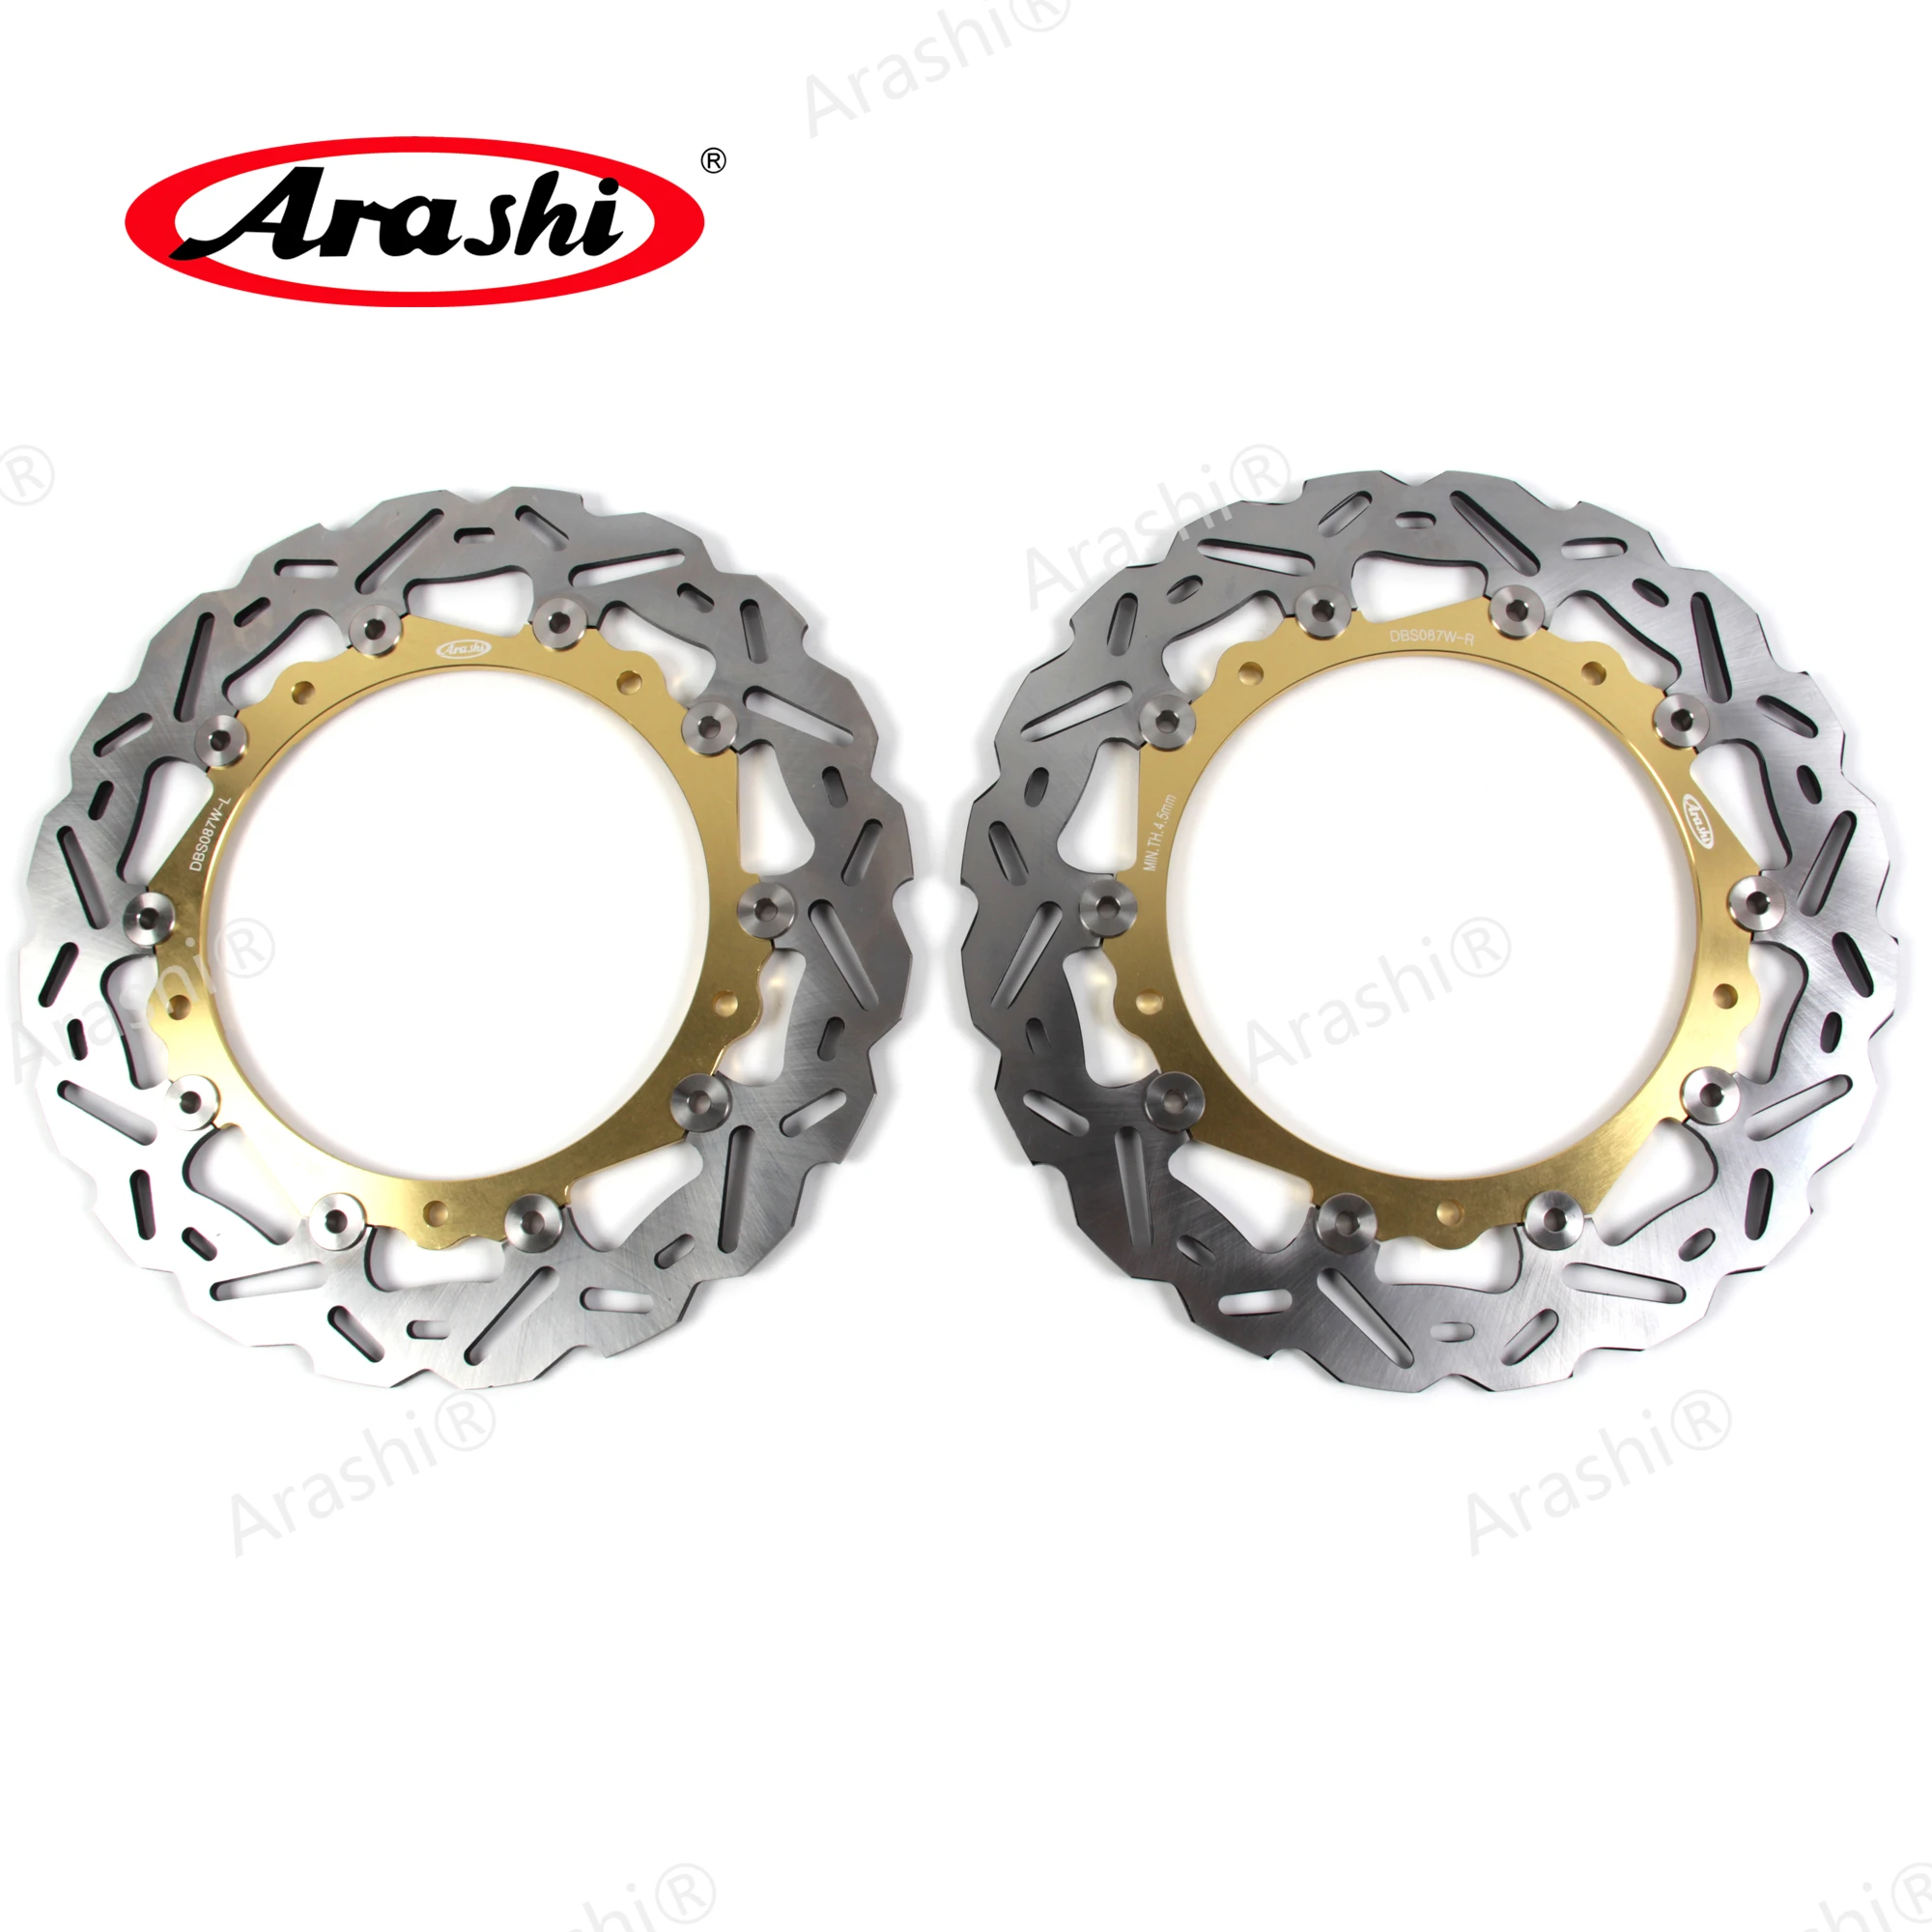 

ARASHI S1000R Front Brake Disc CNC Floating Disk Rotor For BMW S 1000 R S 1000R 2014 2015 2016 2017 / S1000RR 2009-2018 ABS